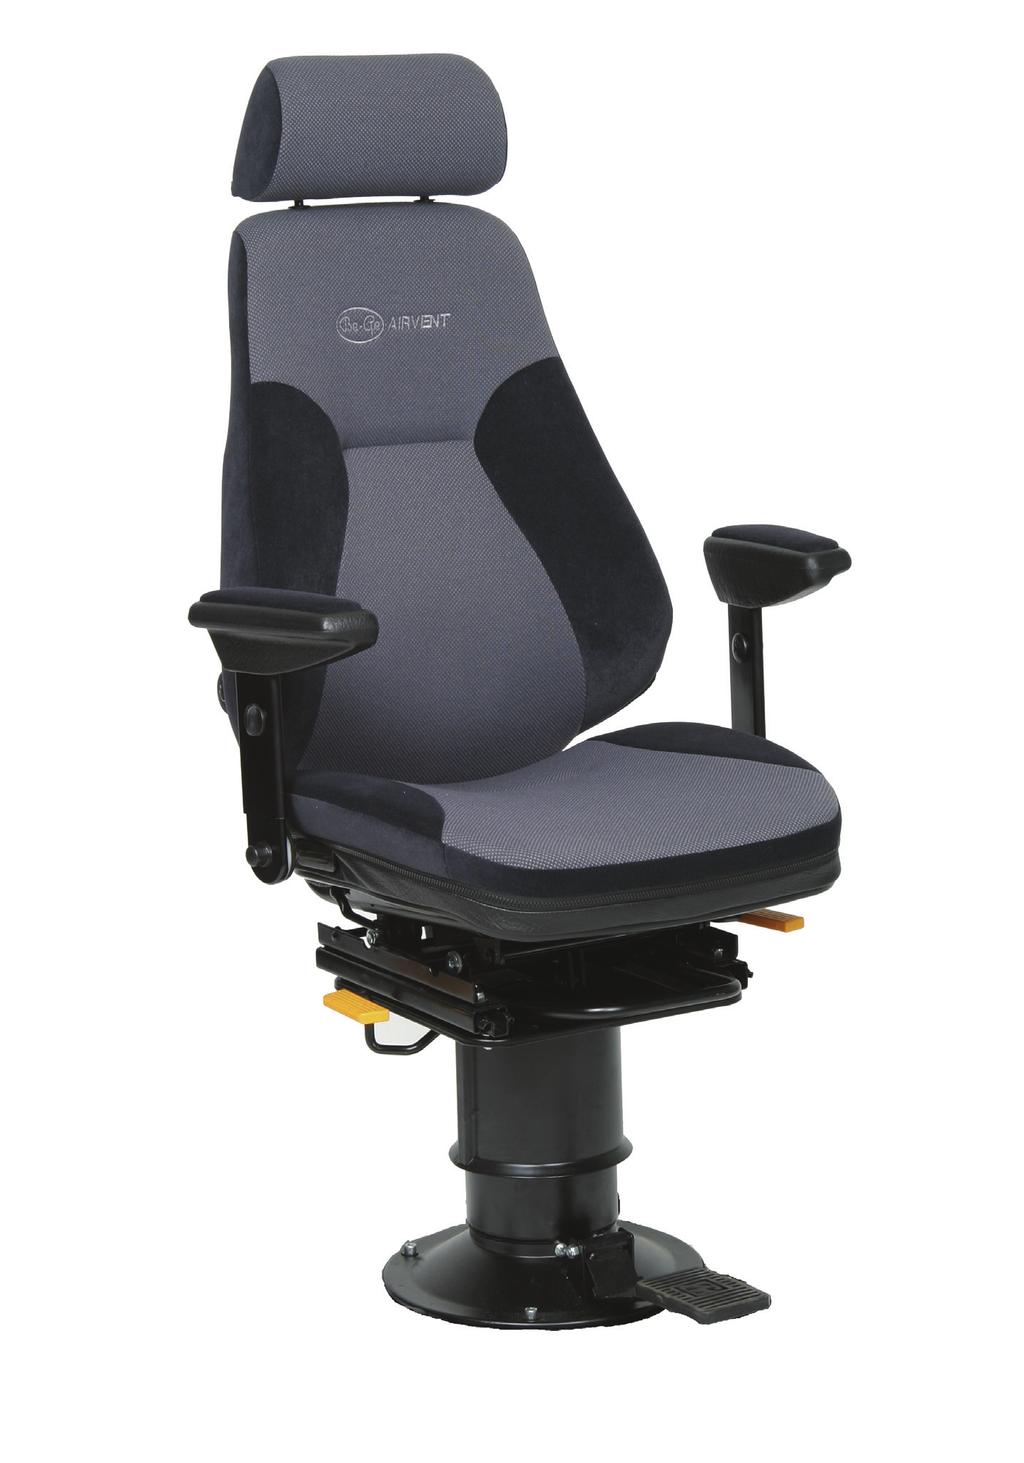 The lumbar support is infinitely adjustable, which provides a constant softness even when adjusted to its max point.